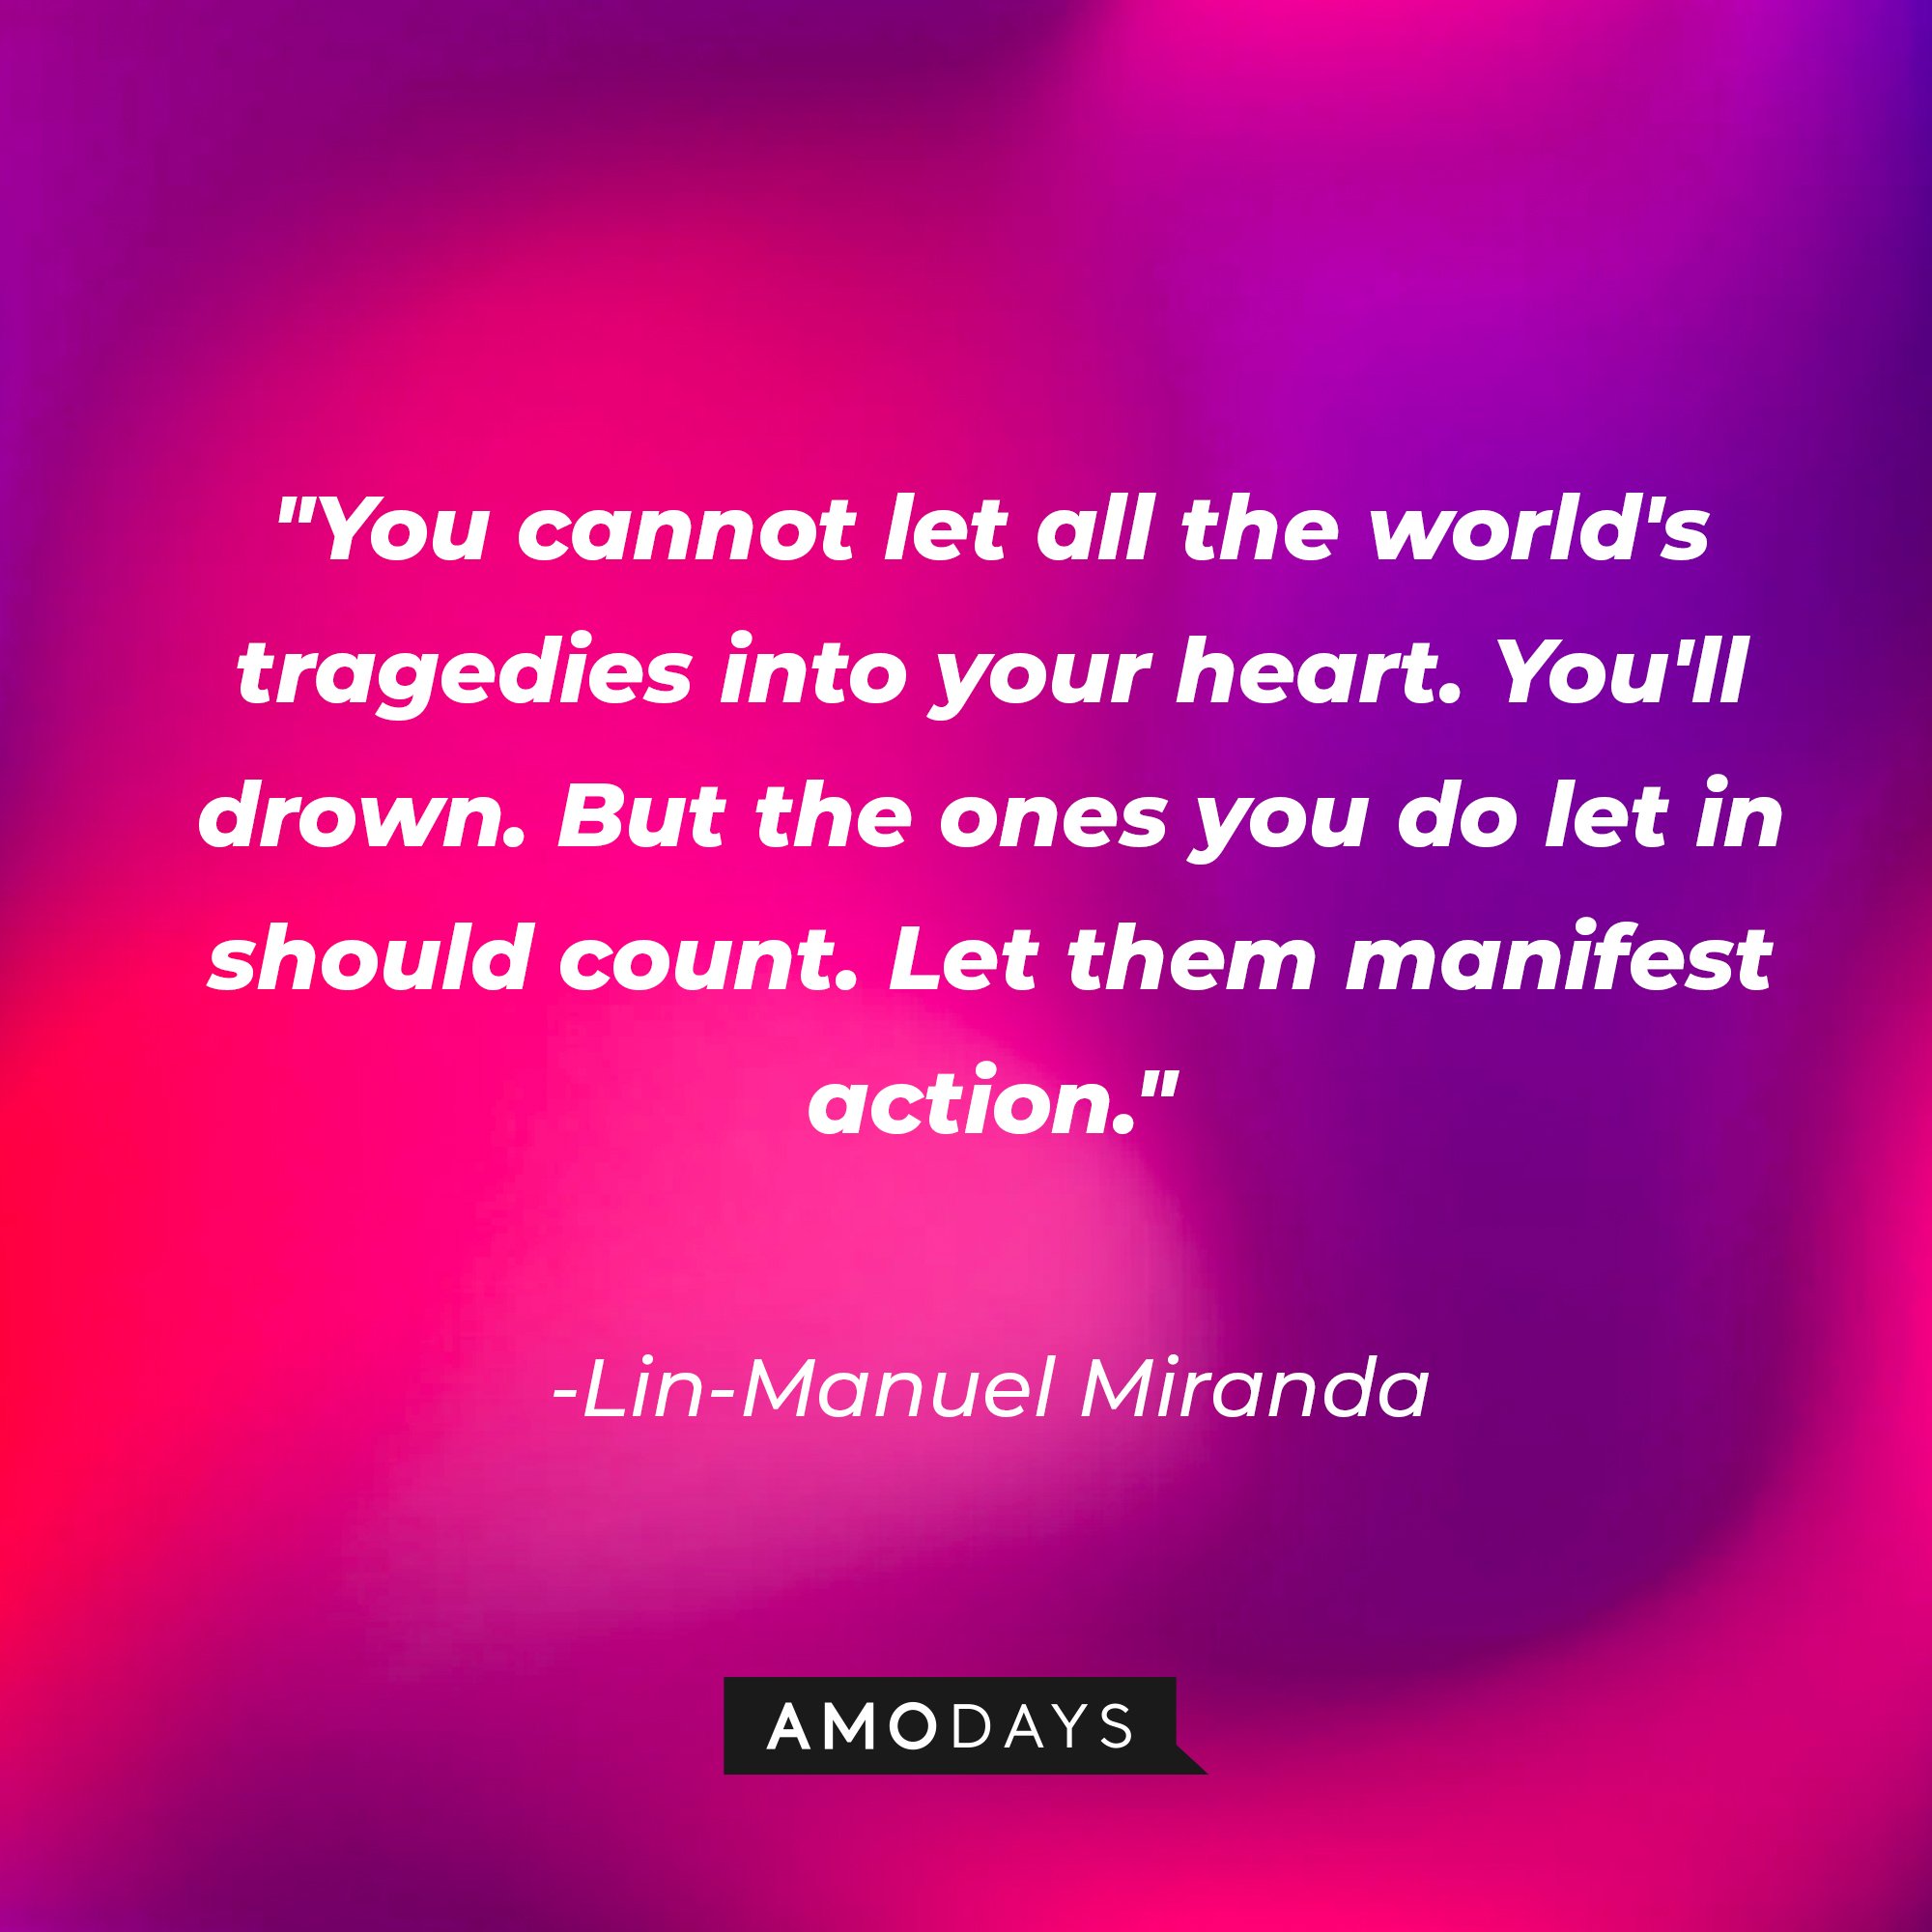 Lin-Manuel Miranda's quote: "You cannot let all the world's tragedies into your heart. You'll drown. But the ones you do let in should count. Let them manifest action." | Image: AmoDays